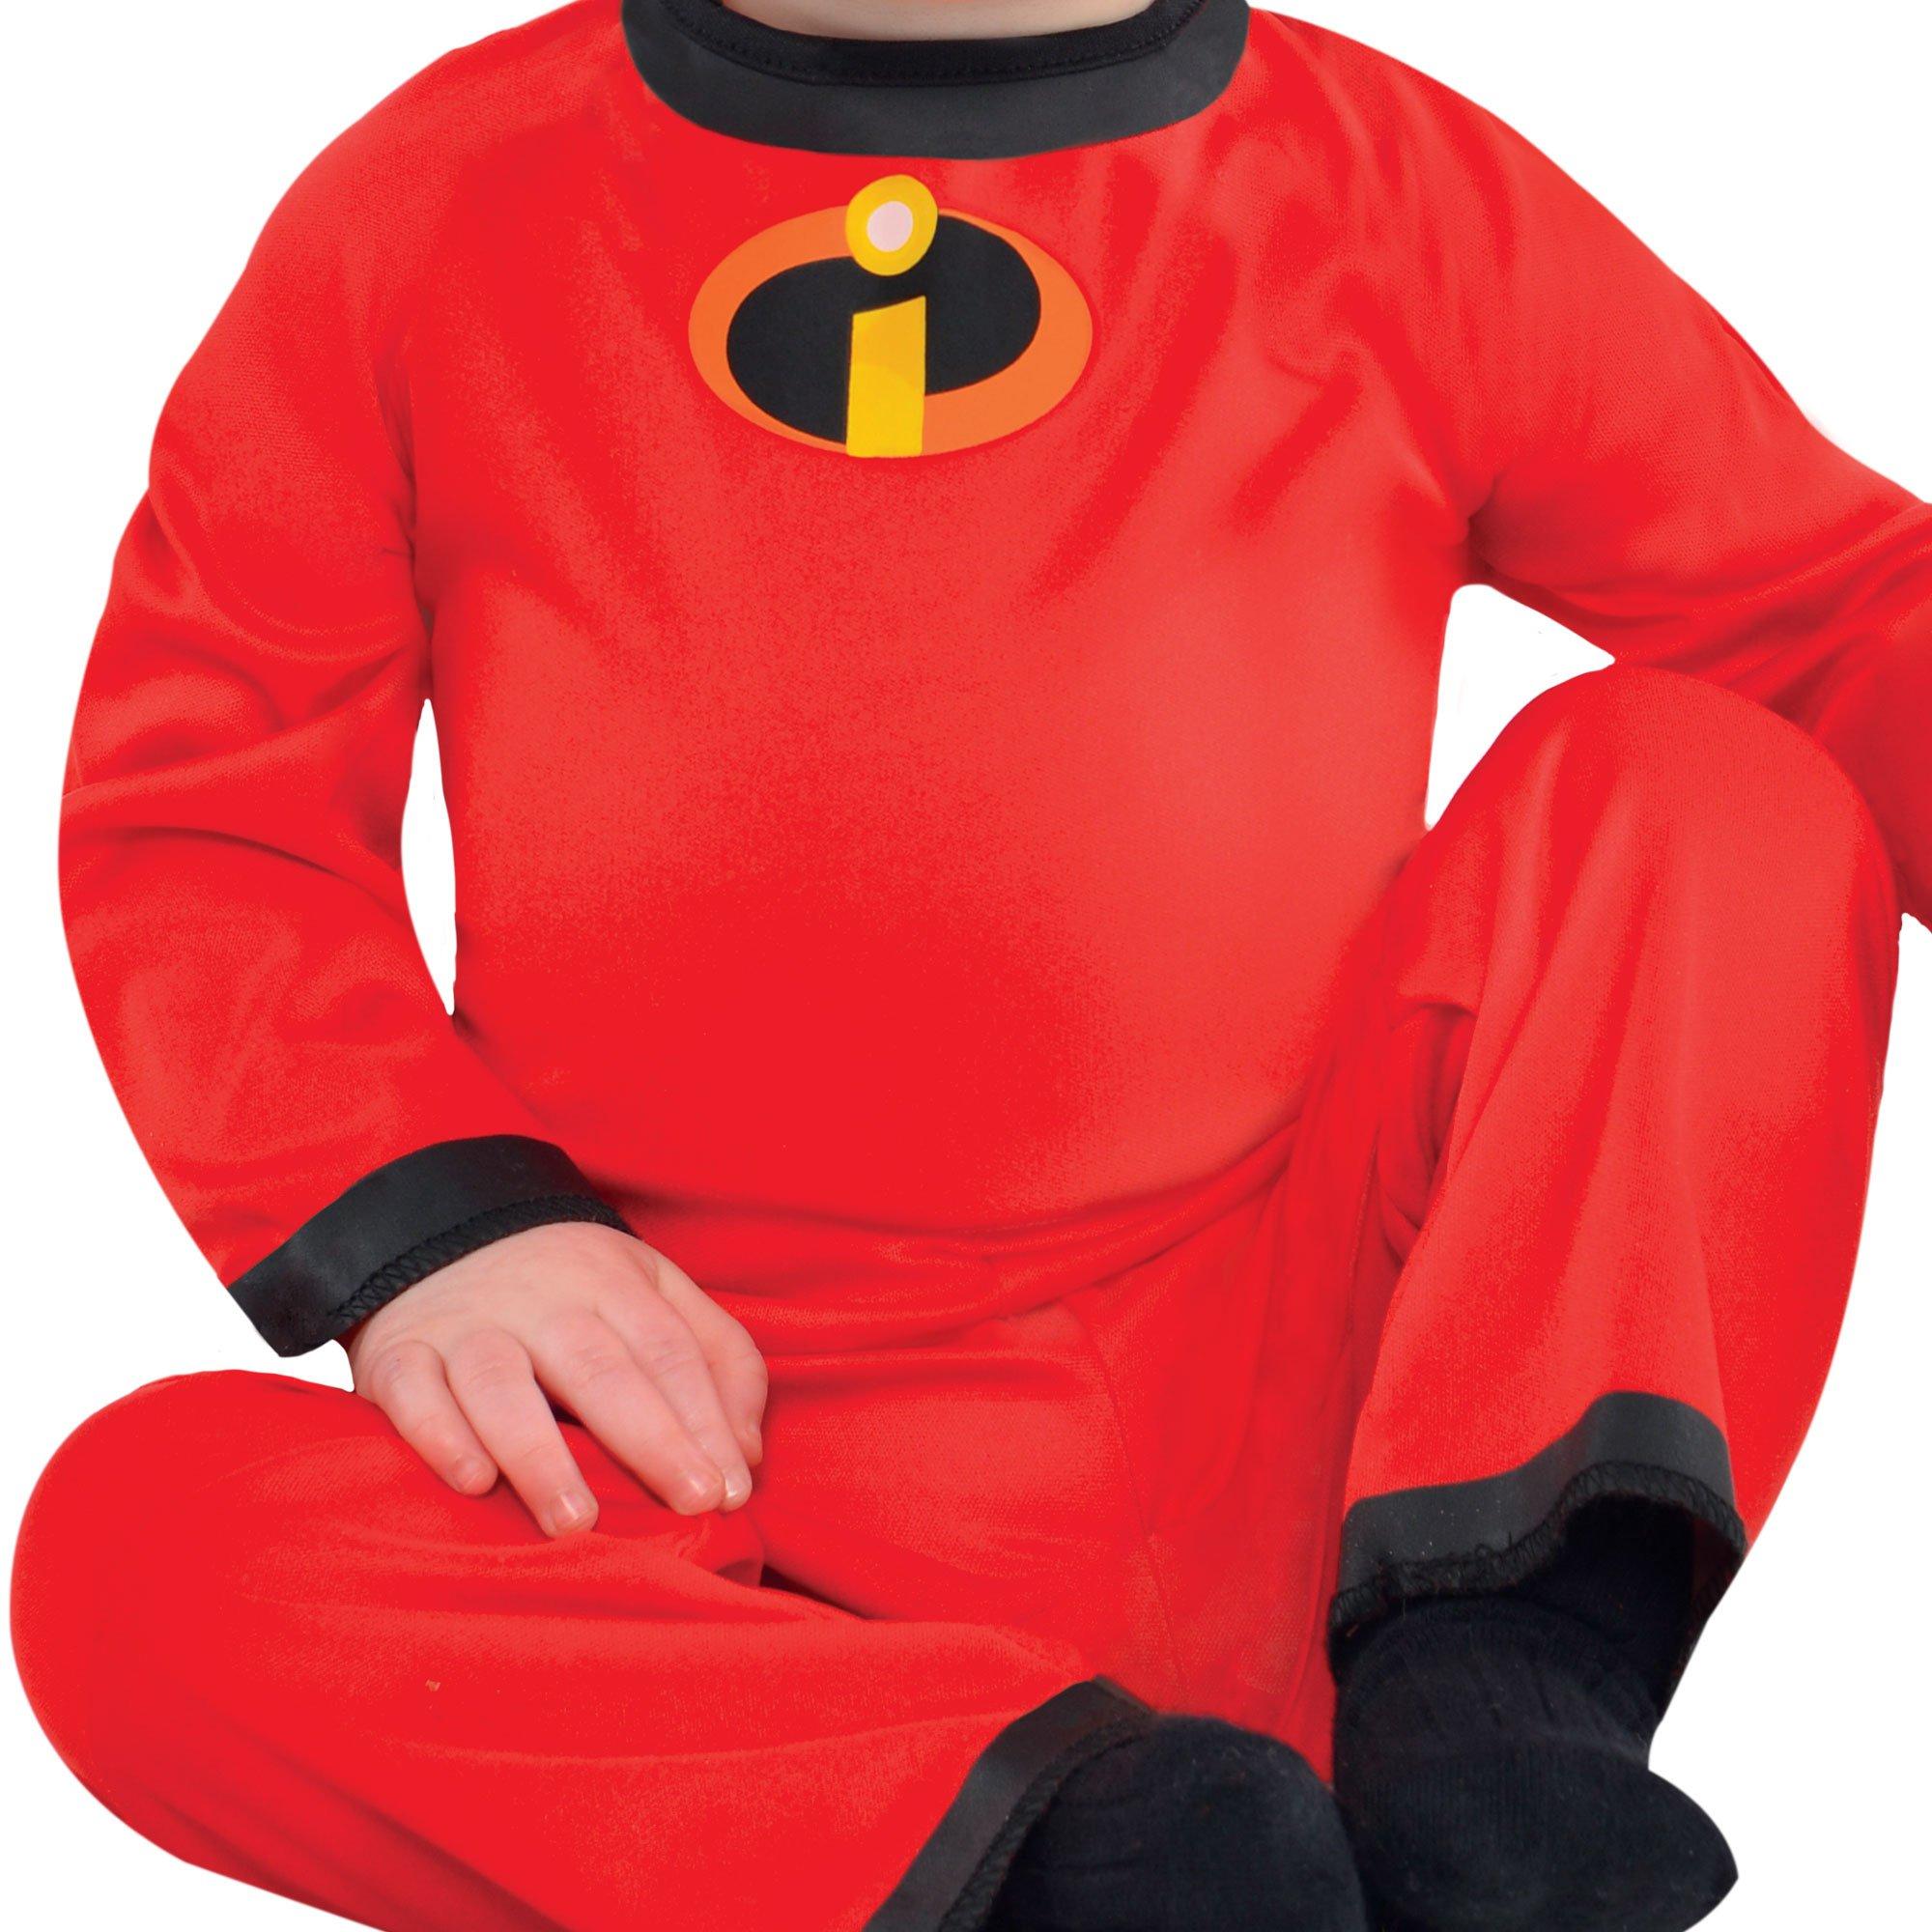 Baby JackJack Costume The Incredibles Party City